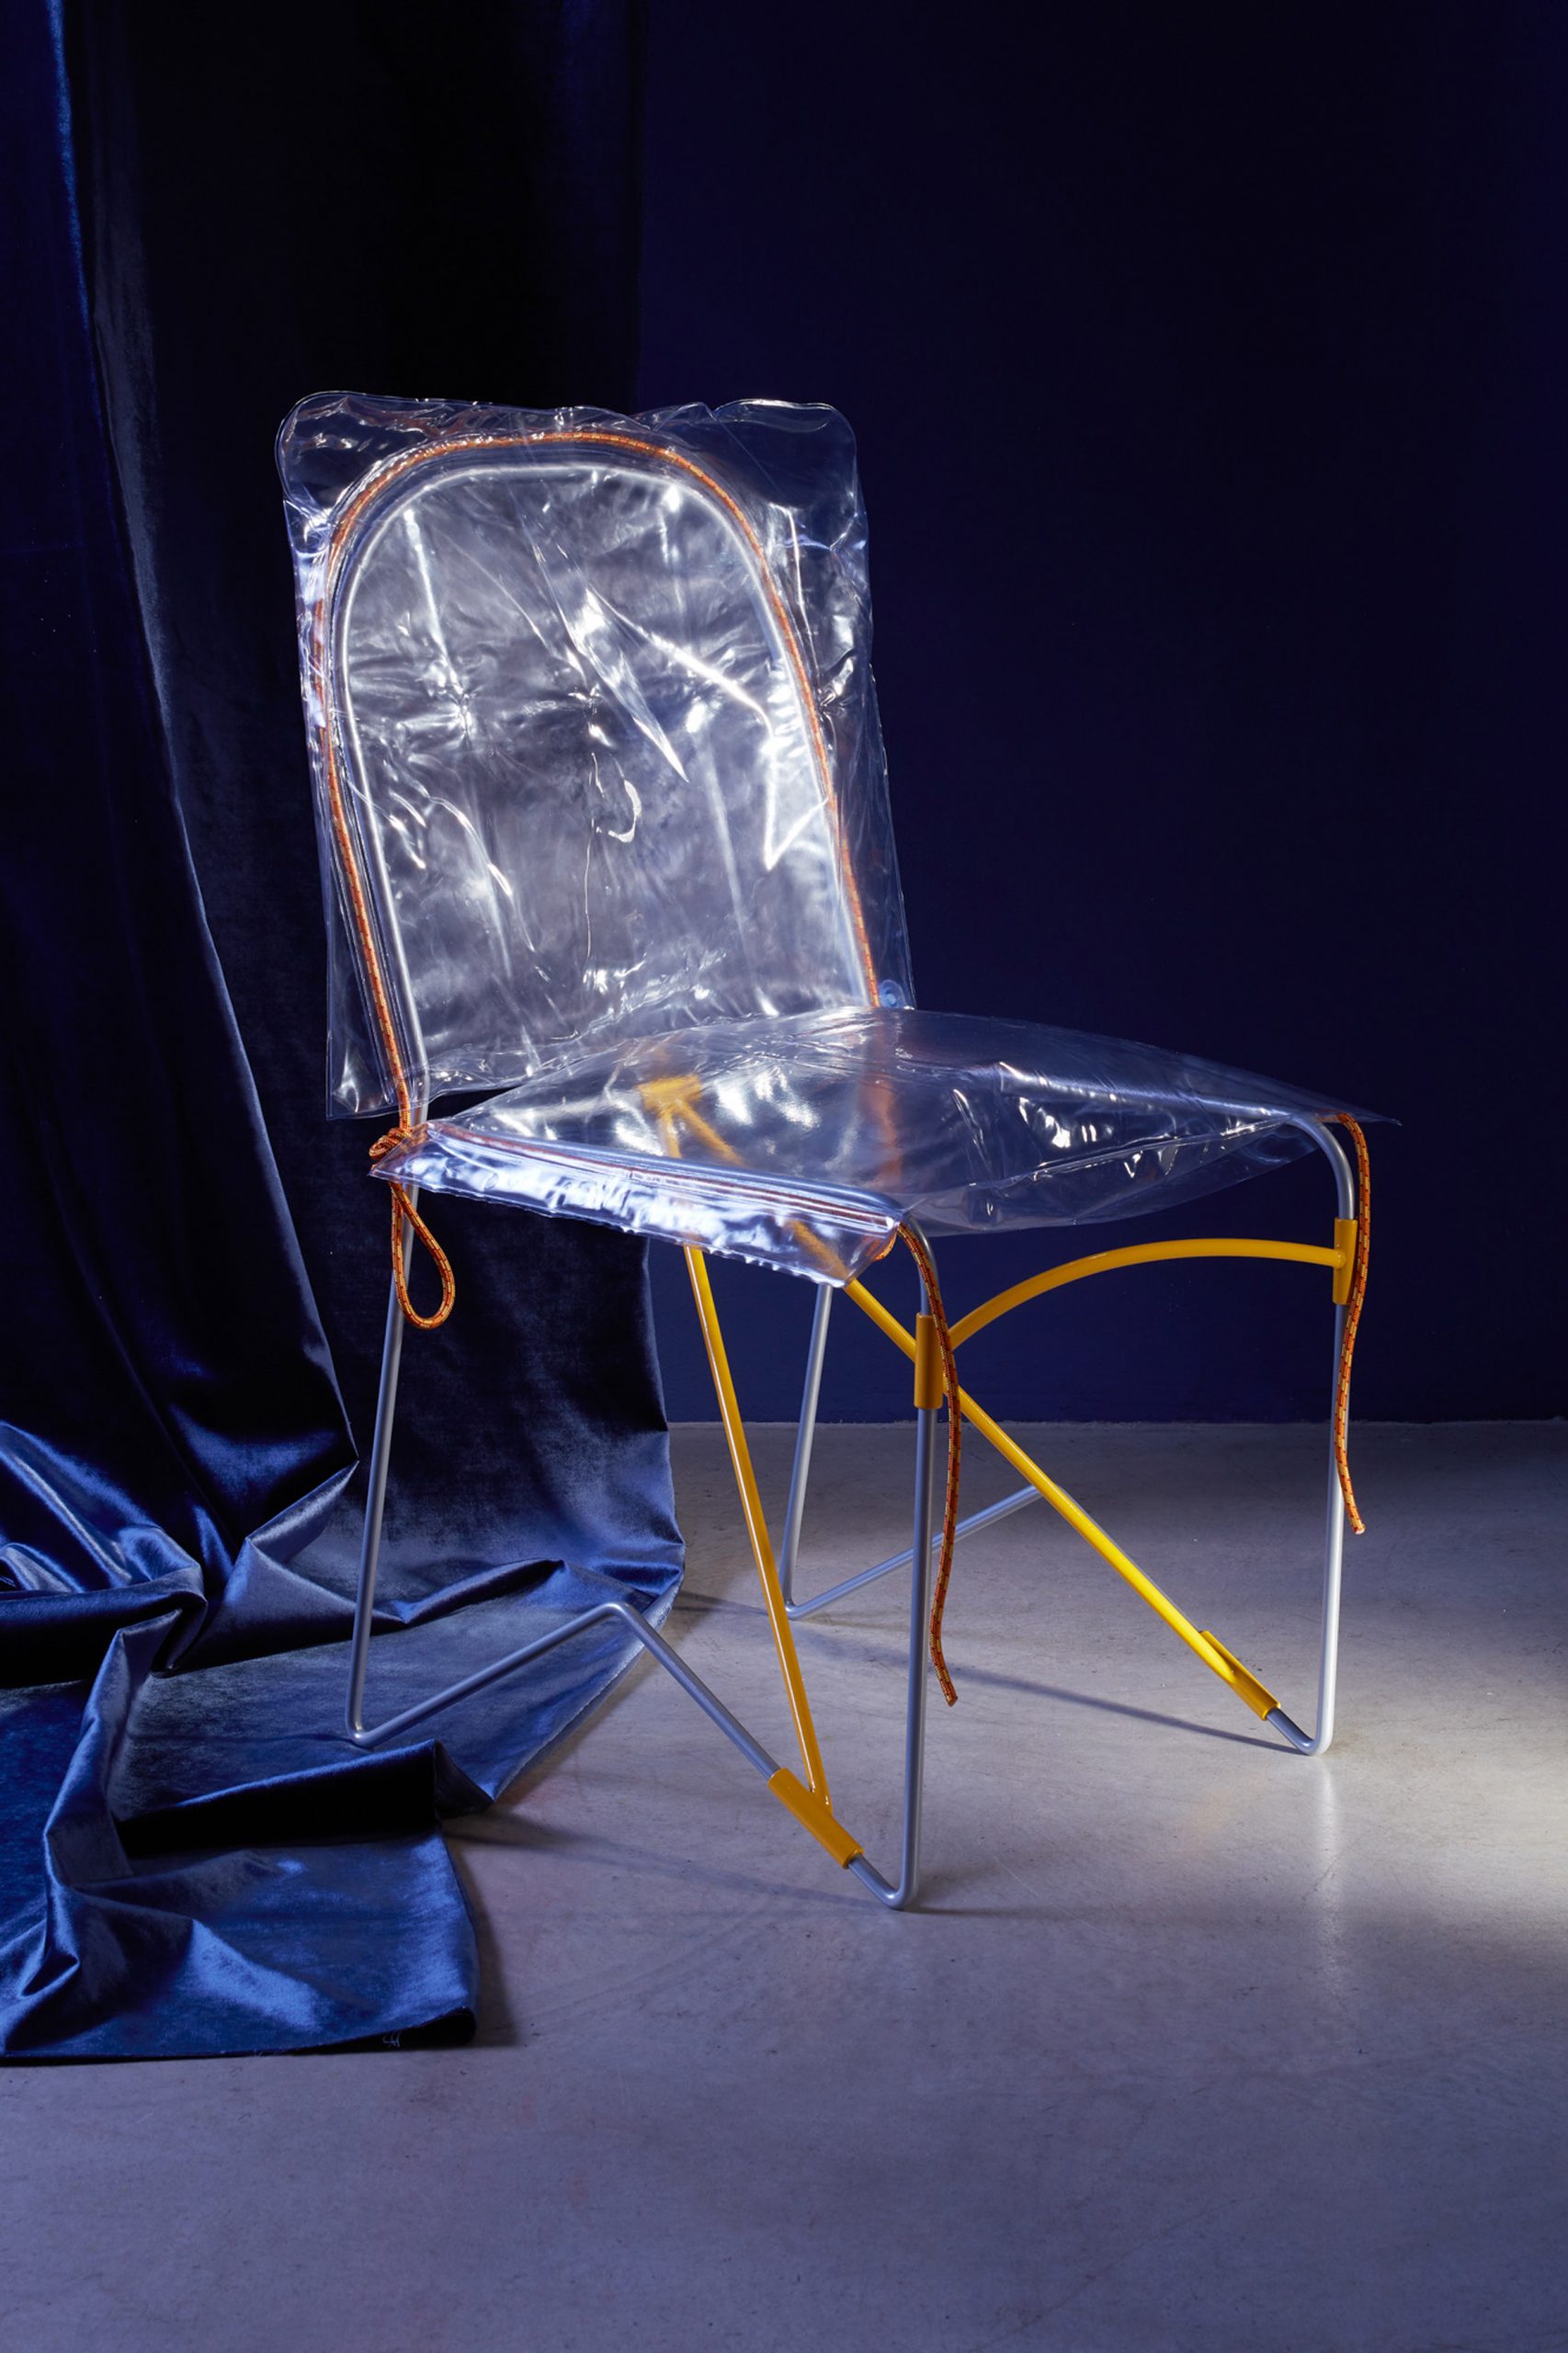 Plastic-clad Zhora chair by Older with Alexander Vinther